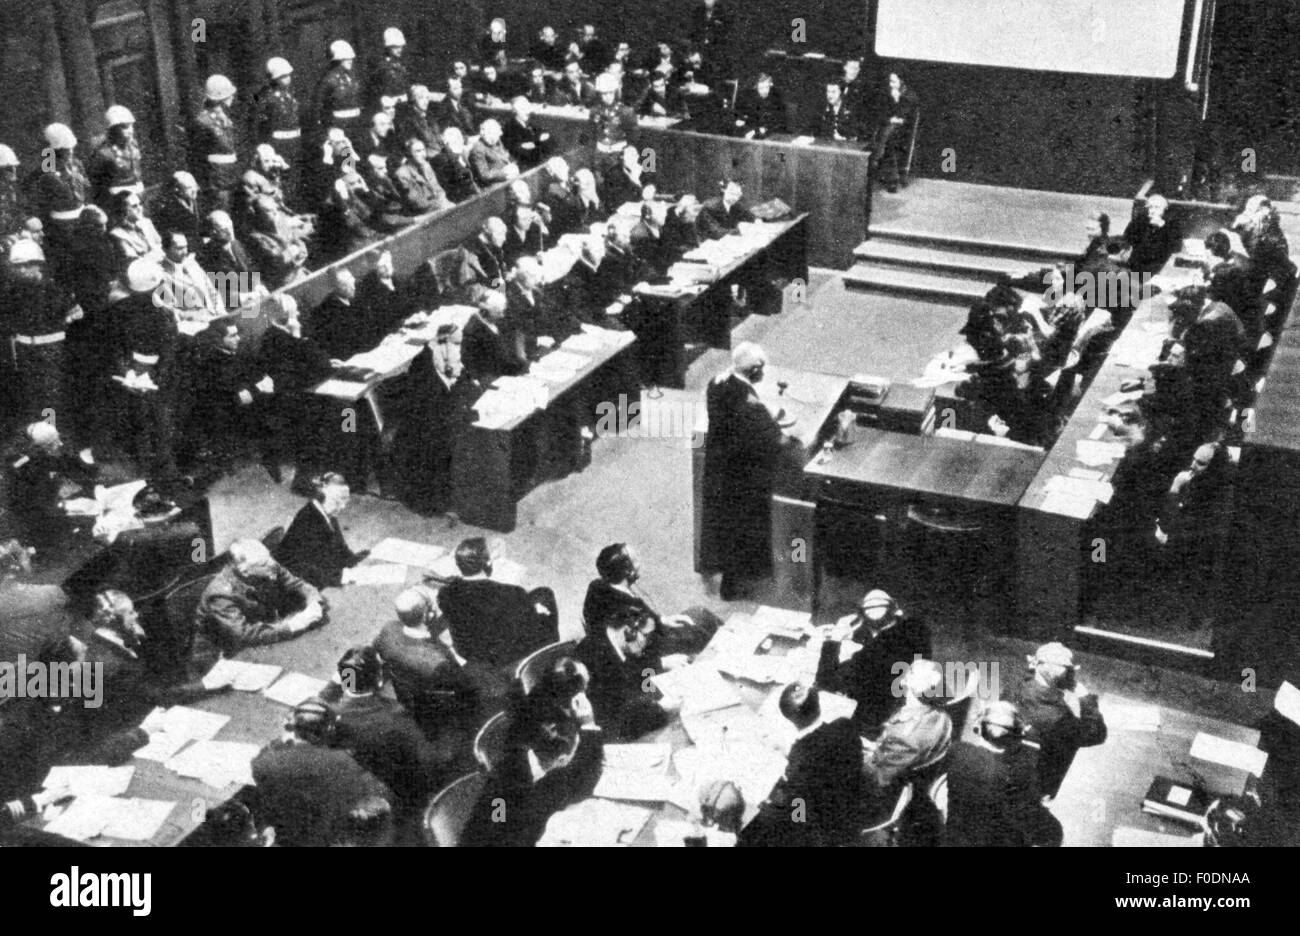 justice, lawsuits, Nuremberg Trials, trial against the major war criminals, view in the court room, Nuremberg, 1945 / 1946, Additional-Rights-Clearences-Not Available Stock Photo